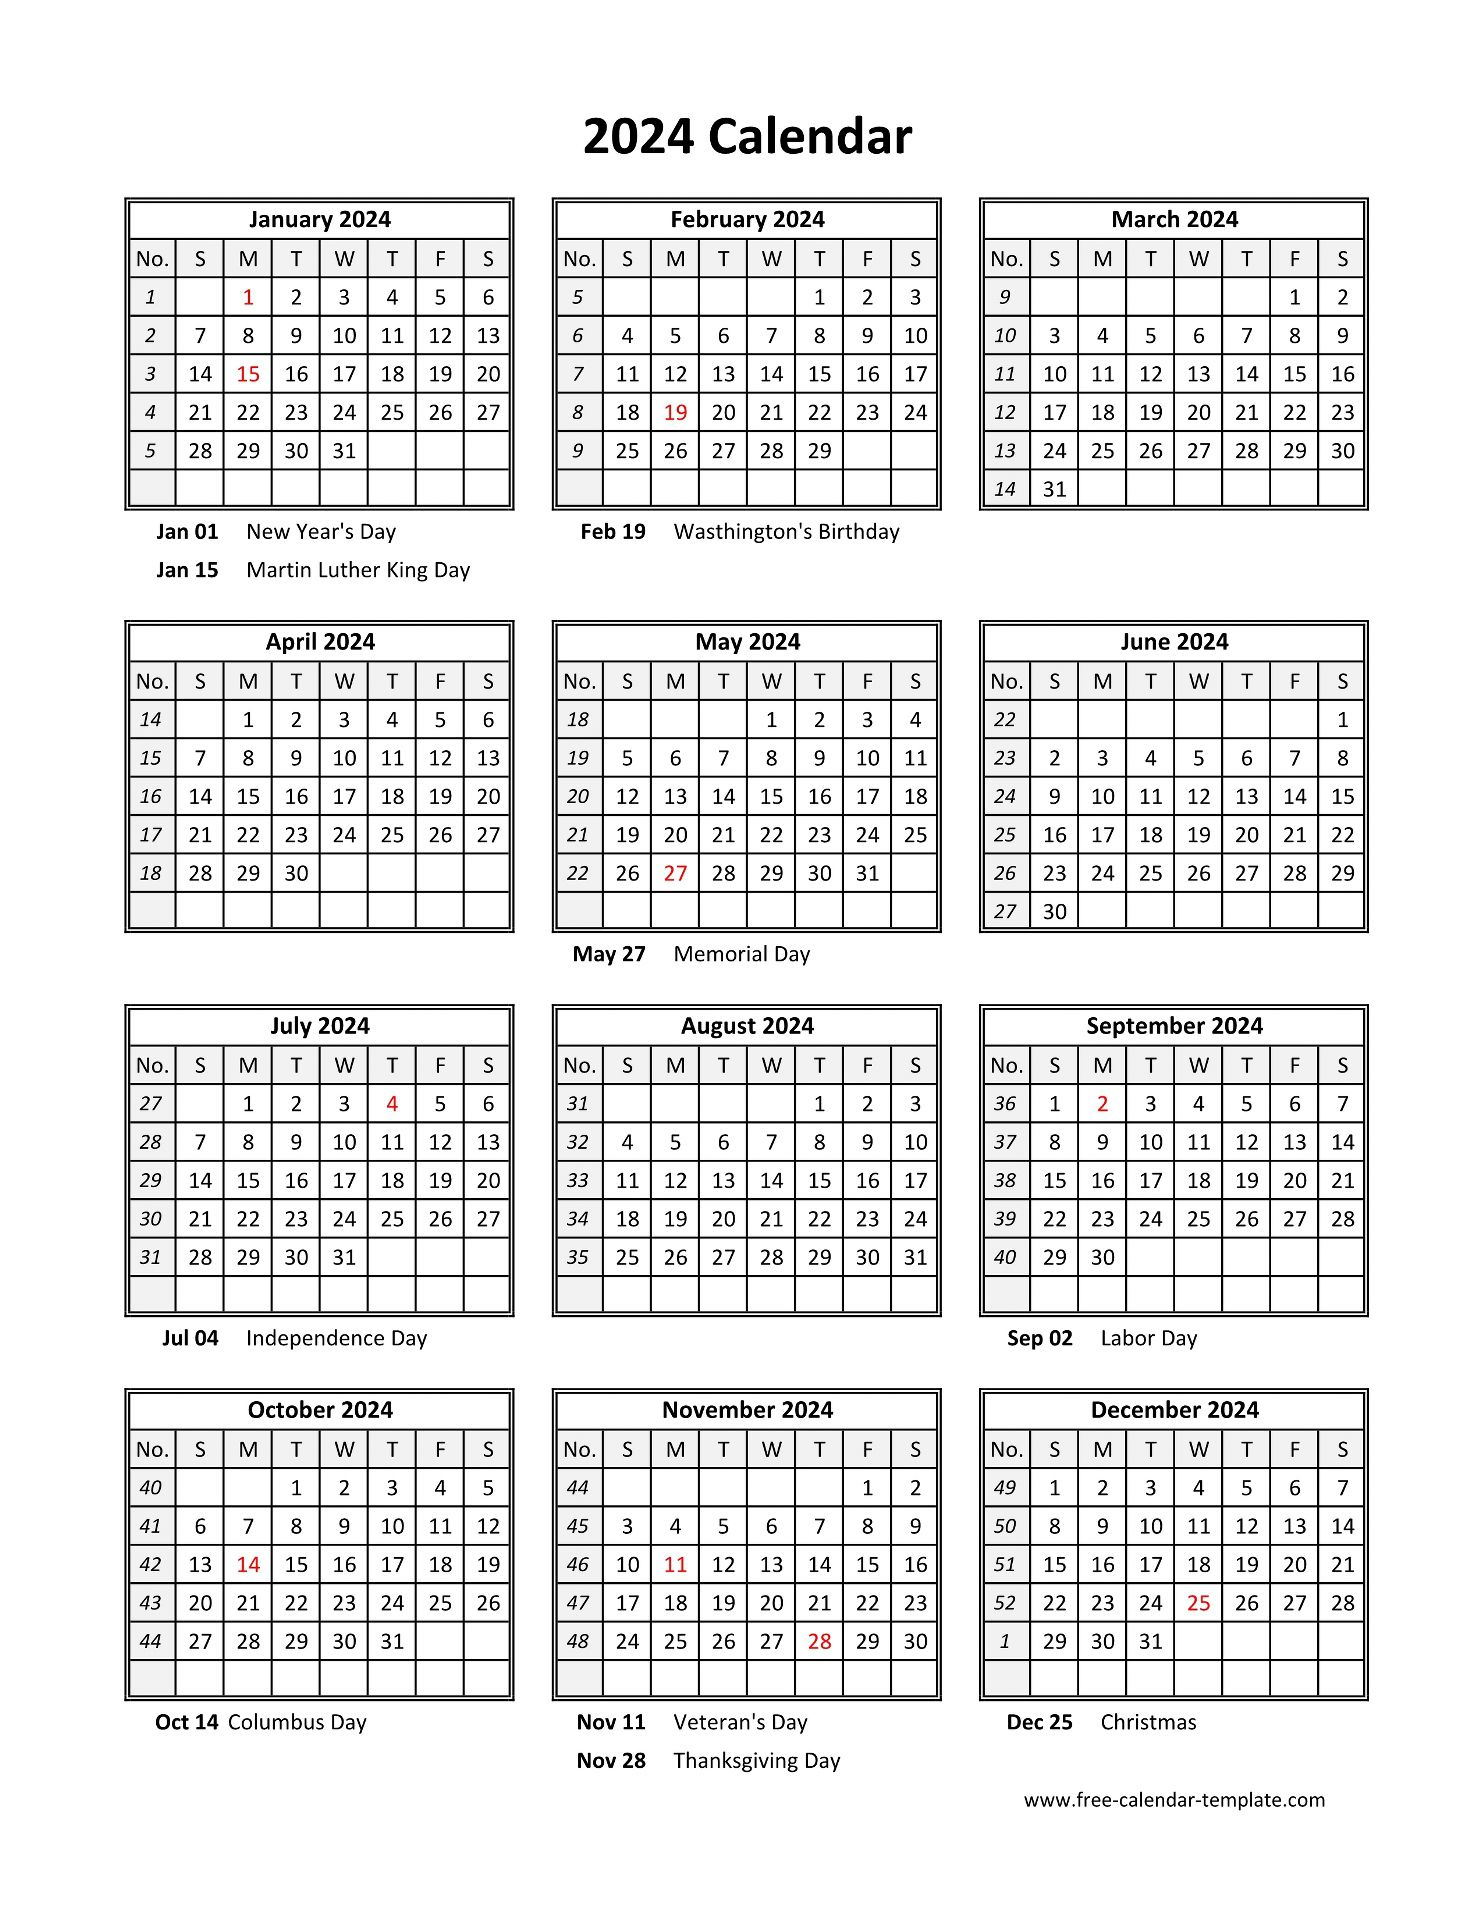 Yearly Printable Calendar 2024 With Holidays | Free-Calendar | Printable Calendar 2024 With Lines